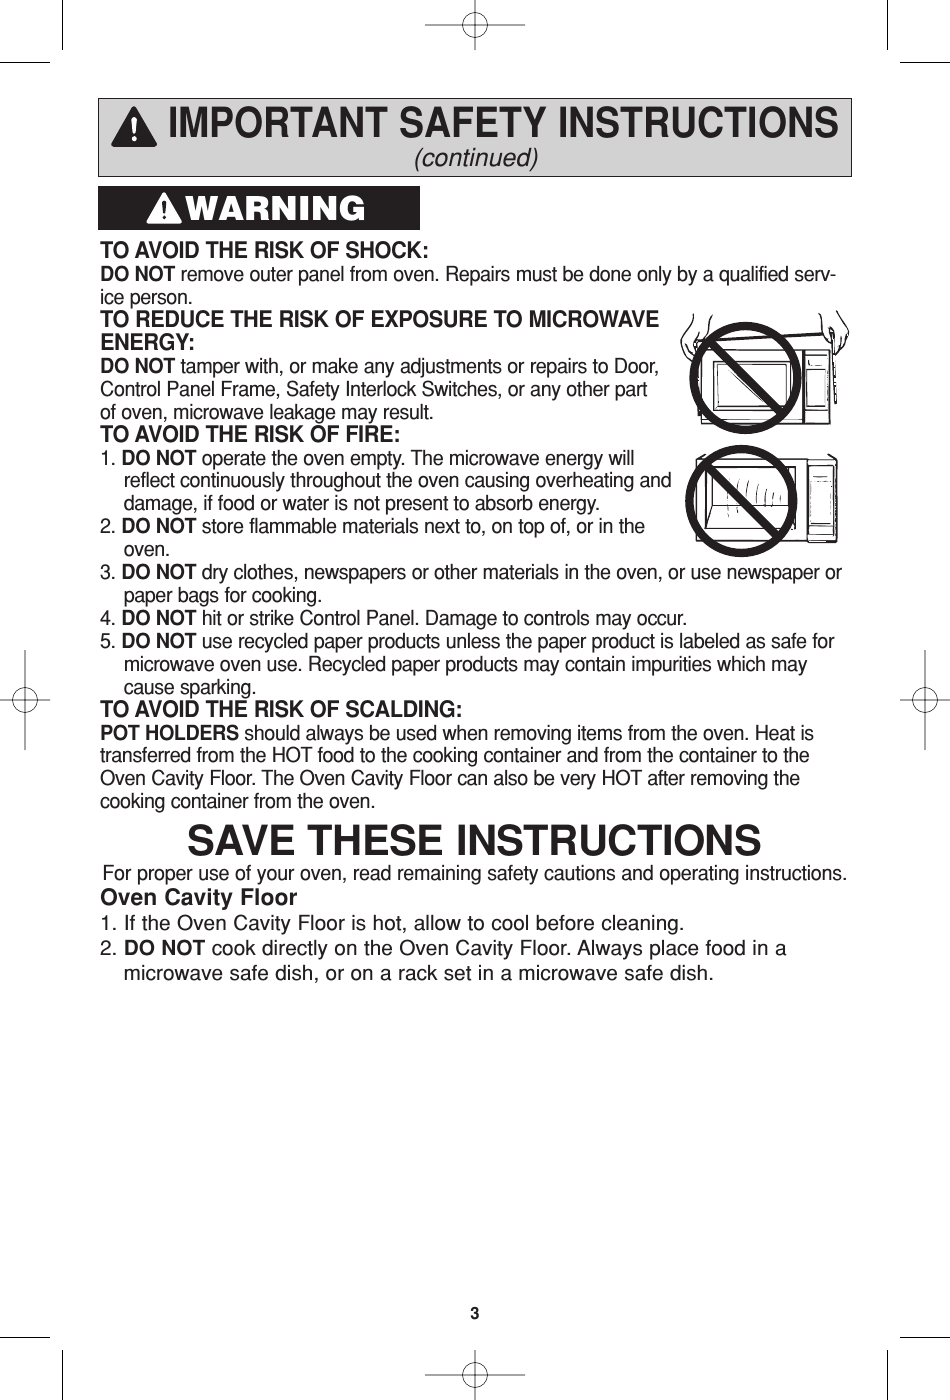 IMPORTANT SAFETY INSTRUCTIONS(continued)TO AVOID THE RISK OF SHOCK: DO NOT remove outer panel from oven. Repairs must be done only by a qualified serv-ice person. TO REDUCE THE RISK OF EXPOSURE TO MICROWAVEENERGY: DO NOT tamper with, or make any adjustments or repairs to Door,Control Panel Frame, Safety Interlock Switches, or any other partof oven, microwave leakage may result. TO AVOID THE RISK OF FIRE: 1. DO NOT operate the oven empty. The microwave energy willreflect continuously throughout the oven causing overheating anddamage, if food or water is not present to absorb energy. 2. DO NOT store flammable materials next to, on top of, or in theoven. 3. DO NOT dry clothes, newspapers or other materials in the oven, or use newspaper orpaper bags for cooking. 4. DO NOT hit or strike Control Panel. Damage to controls may occur. 5. DO NOT use recycled paper products unless the paper product is labeled as safe formicrowave oven use. Recycled paper products may contain impurities which maycause sparking. TO AVOID THE RISK OF SCALDING: POT HOLDERS should always be used when removing items from the oven. Heat istransferred from the HOT food to the cooking container and from the container to theOven Cavity Floor. The Oven Cavity Floor can also be very HOT after removing thecooking container from the oven. WARNINGSAVE THESE INSTRUCTIONSFor proper use of your oven, read remaining safety cautions and operating instructions.Oven Cavity Floor 1. If the Oven Cavity Floor is hot, allow to cool before cleaning. 2. DO NOT cook directly on the Oven Cavity Floor. Always place food in amicrowave safe dish, or on a rack set in a microwave safe dish.3